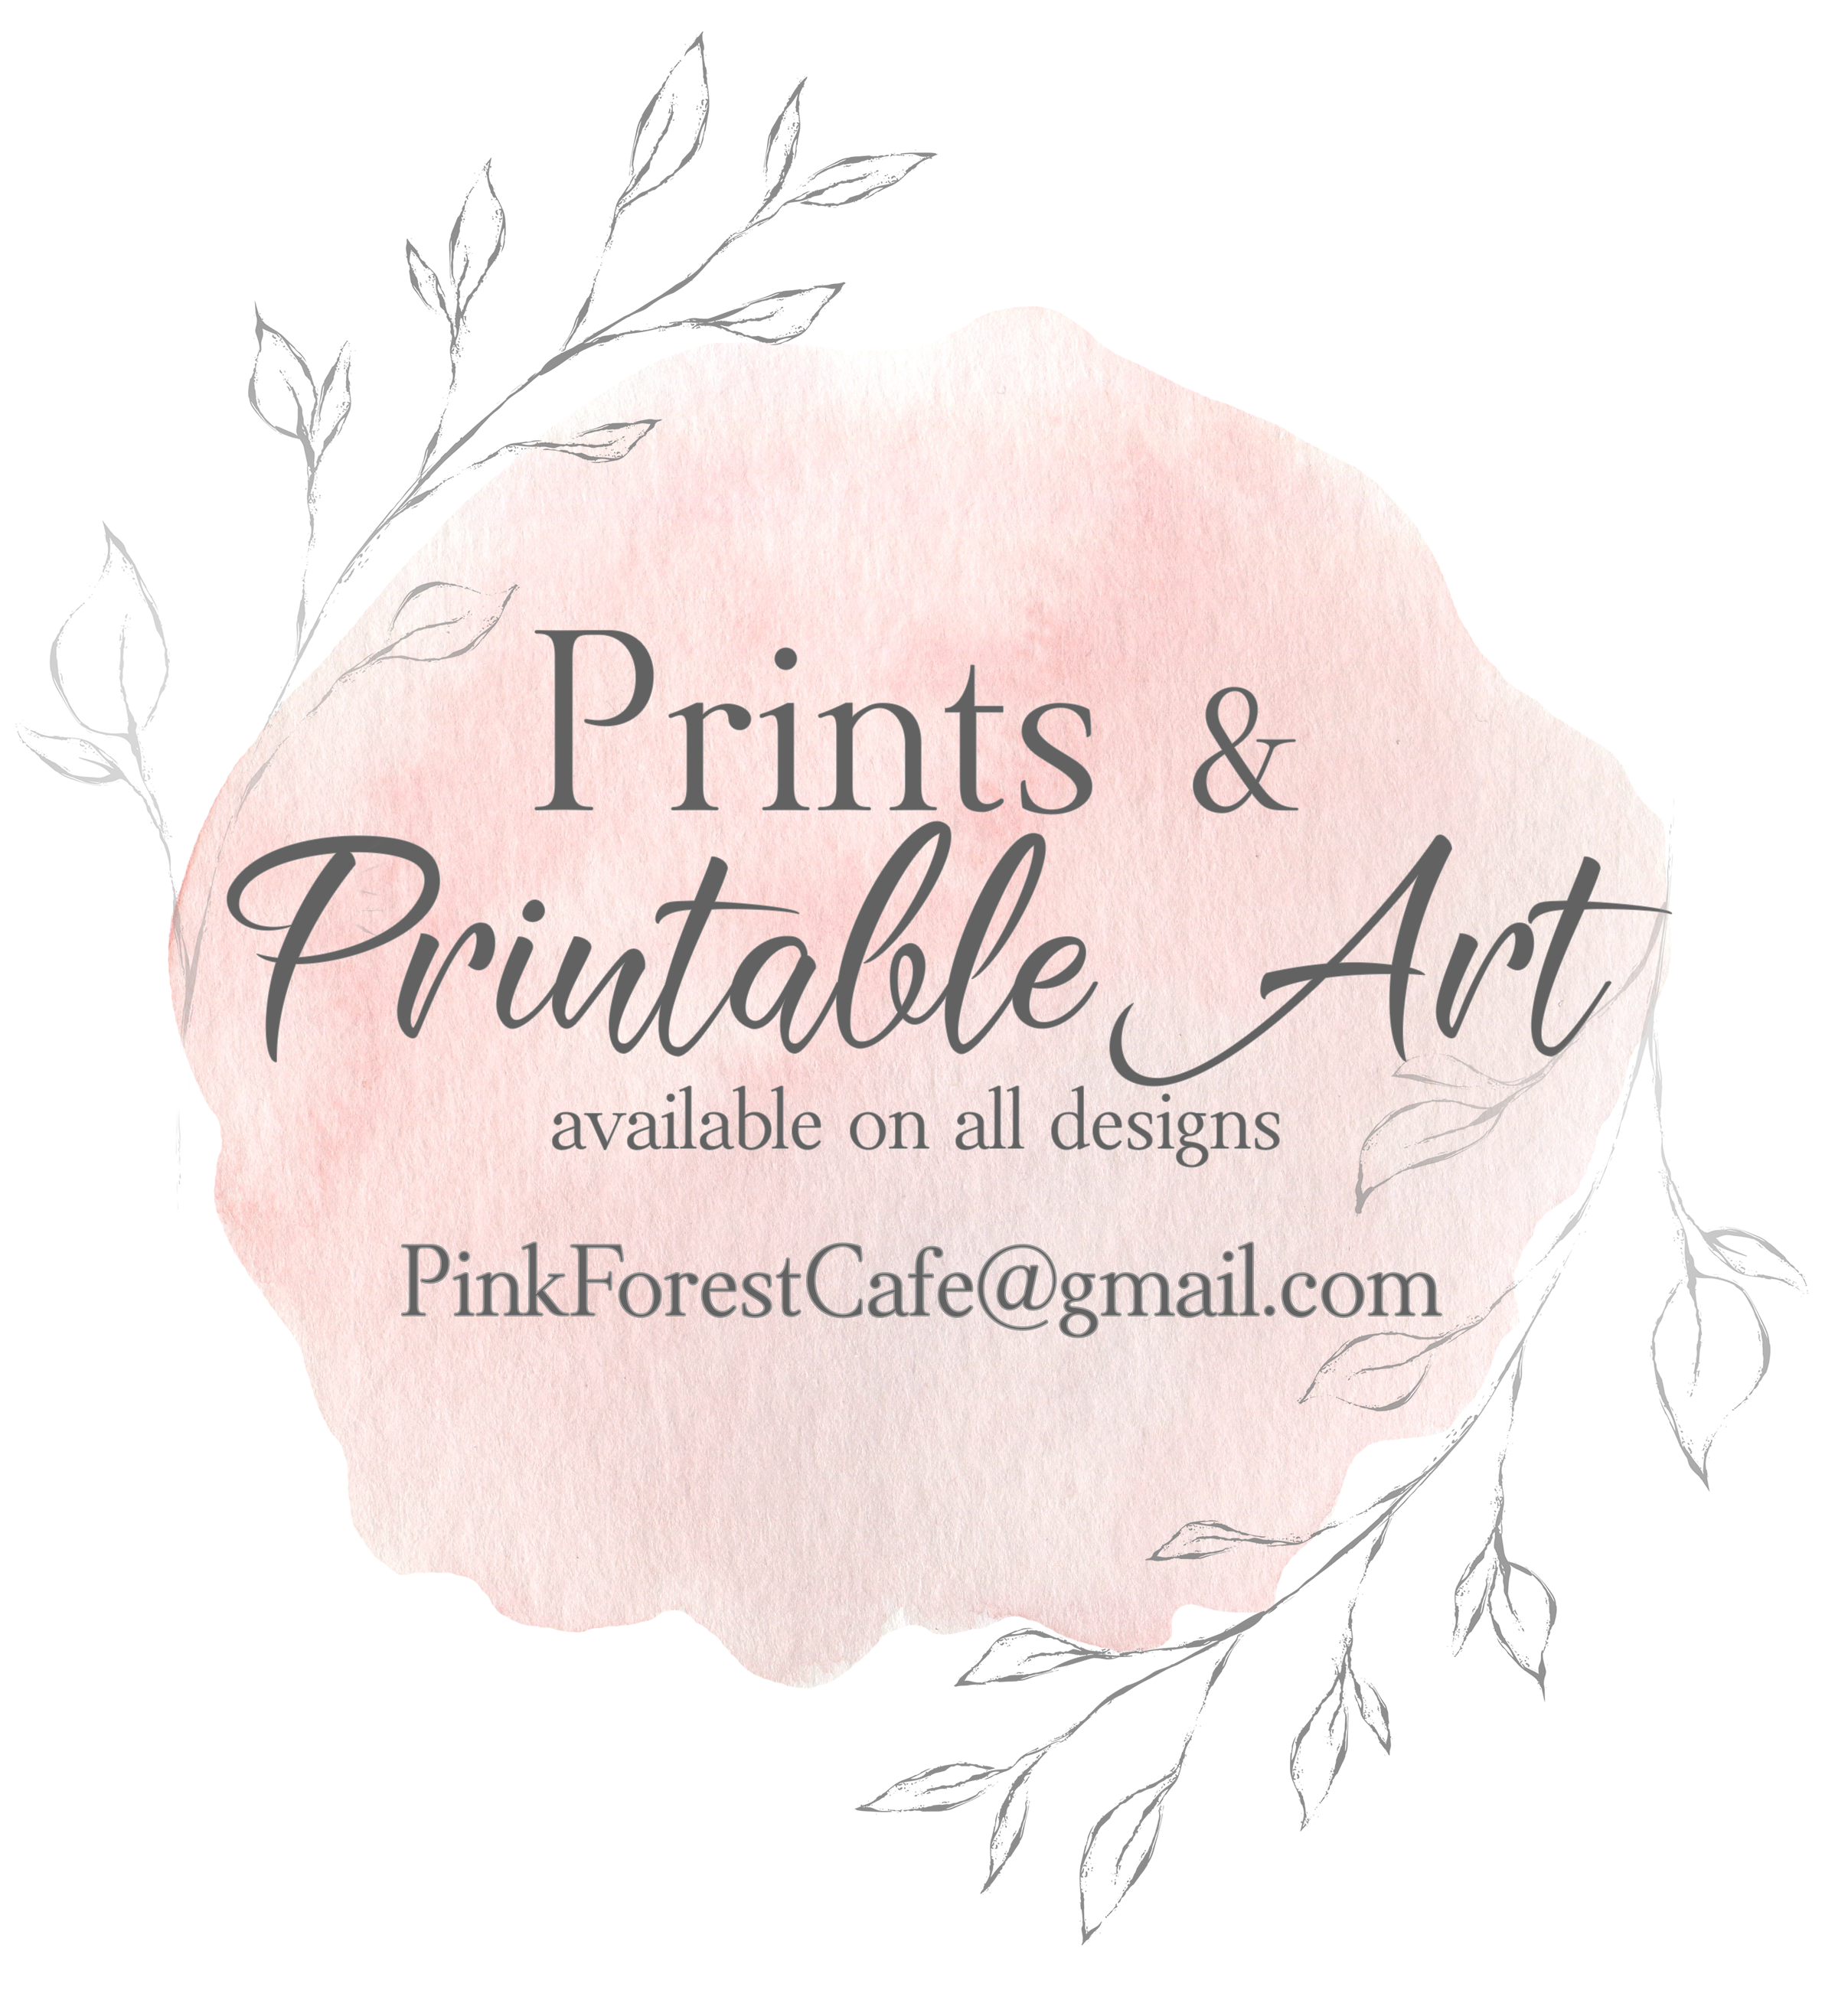 Order My Print - Pink Forest Cafe - 11 (Eleven) Prints - 11 Designs Printed and Shipped